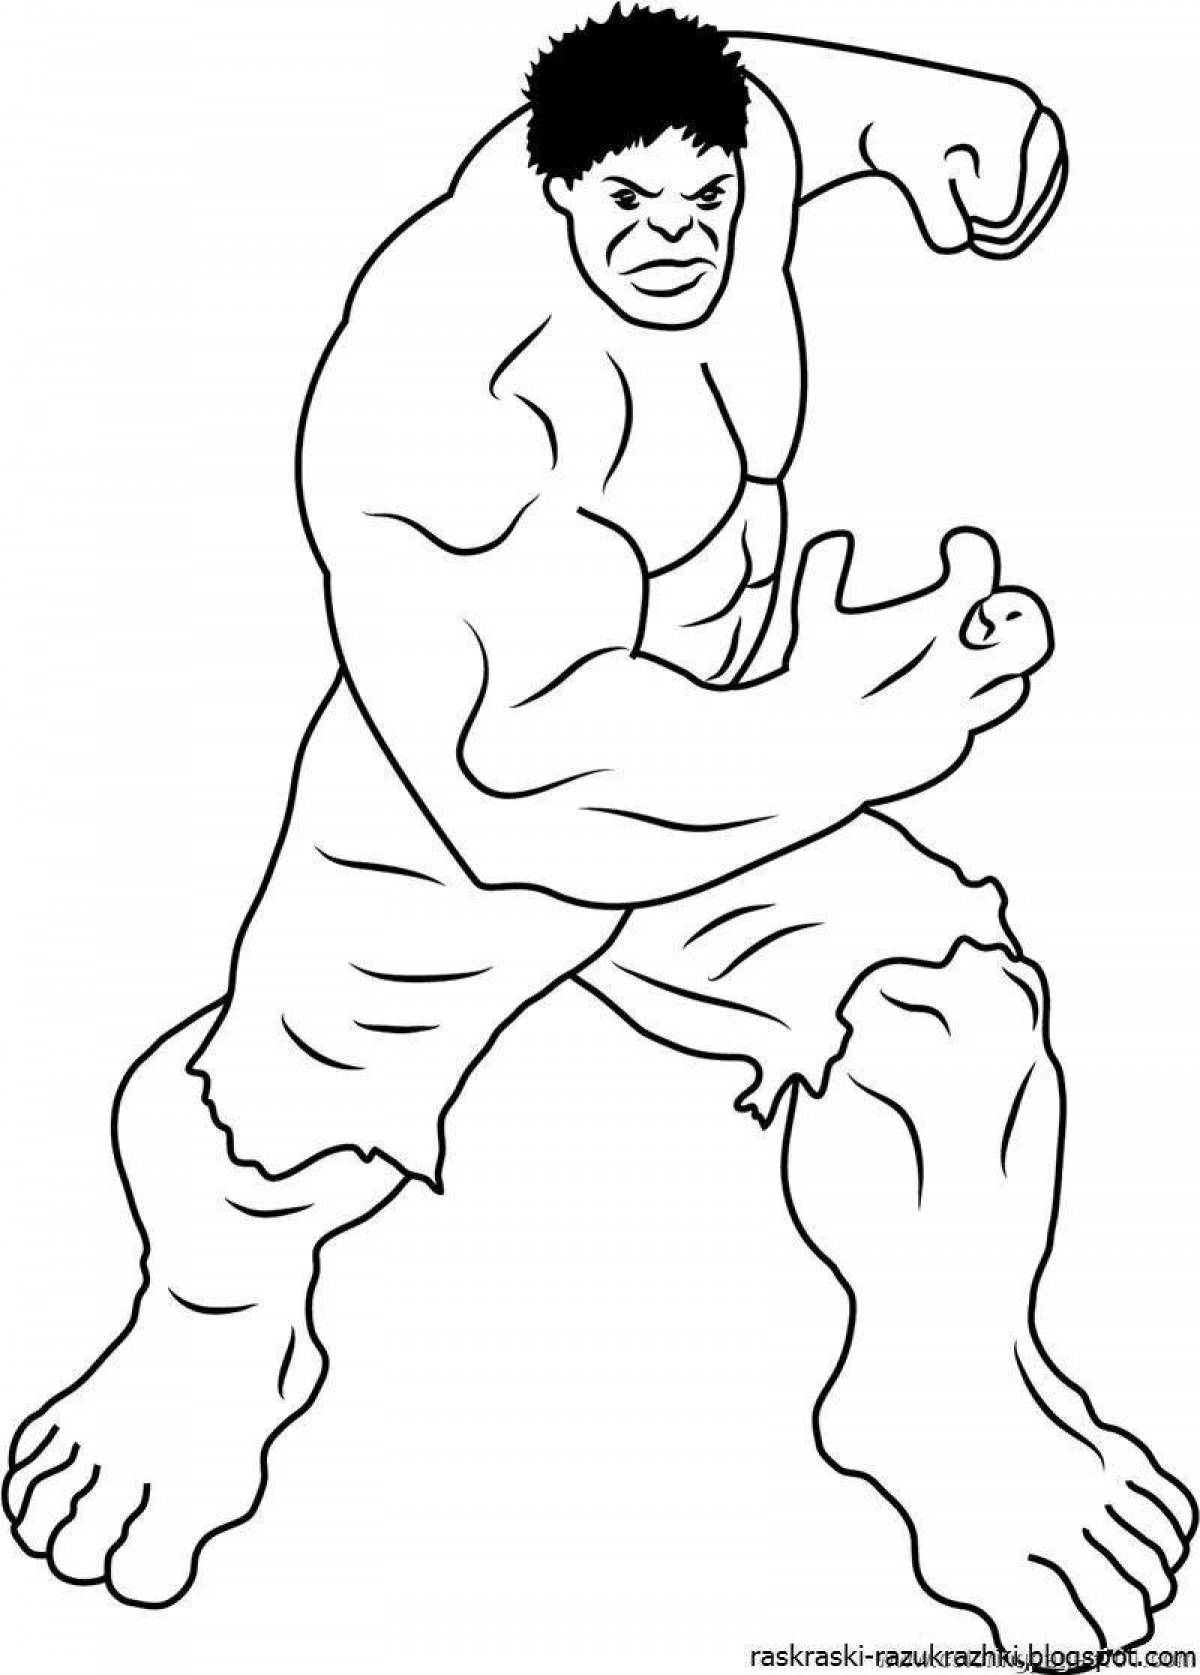 Adorable Hulk coloring book for kids